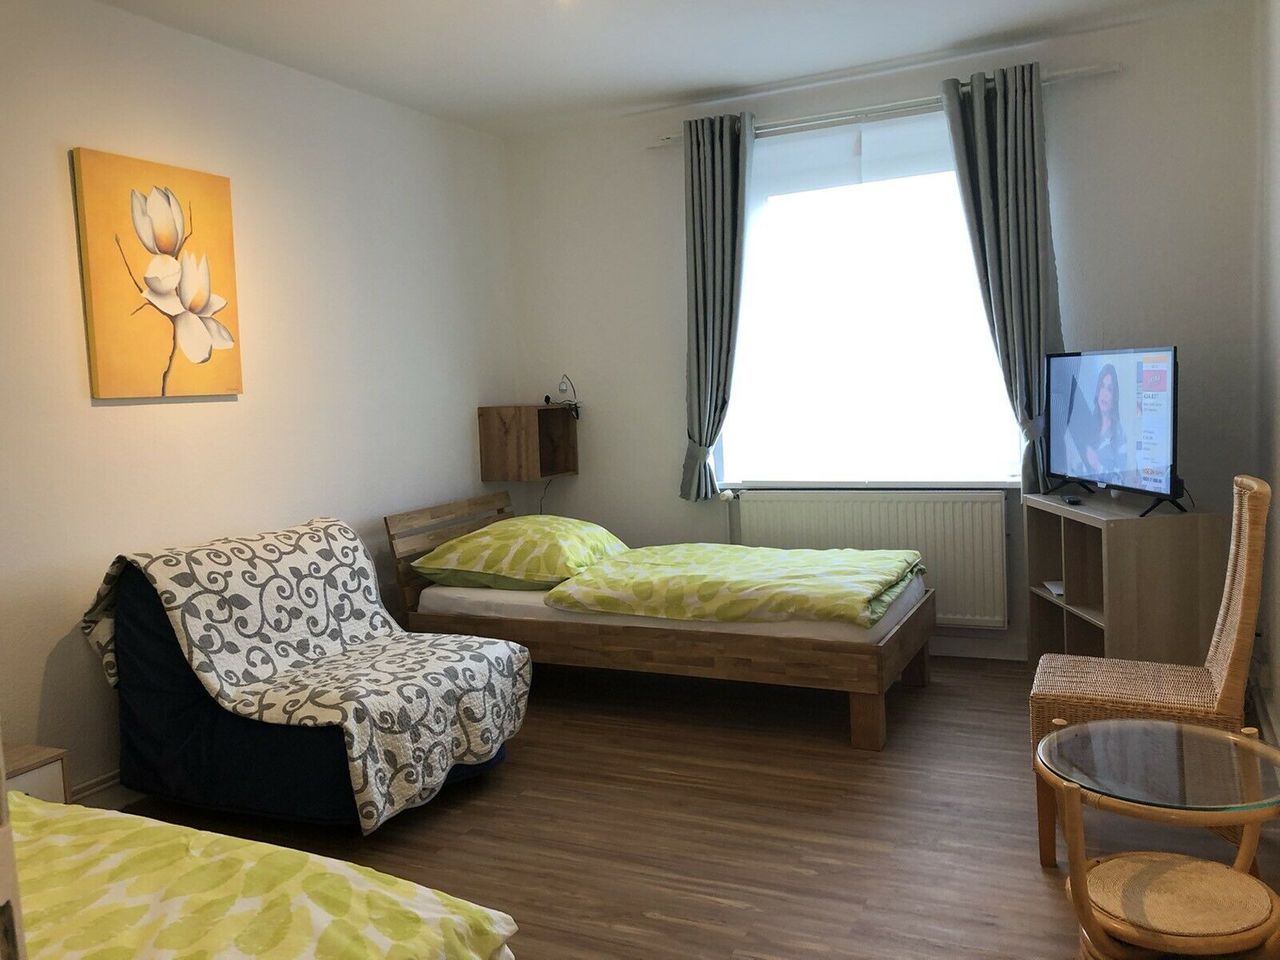 Comfortably furnished apartment in Hannover